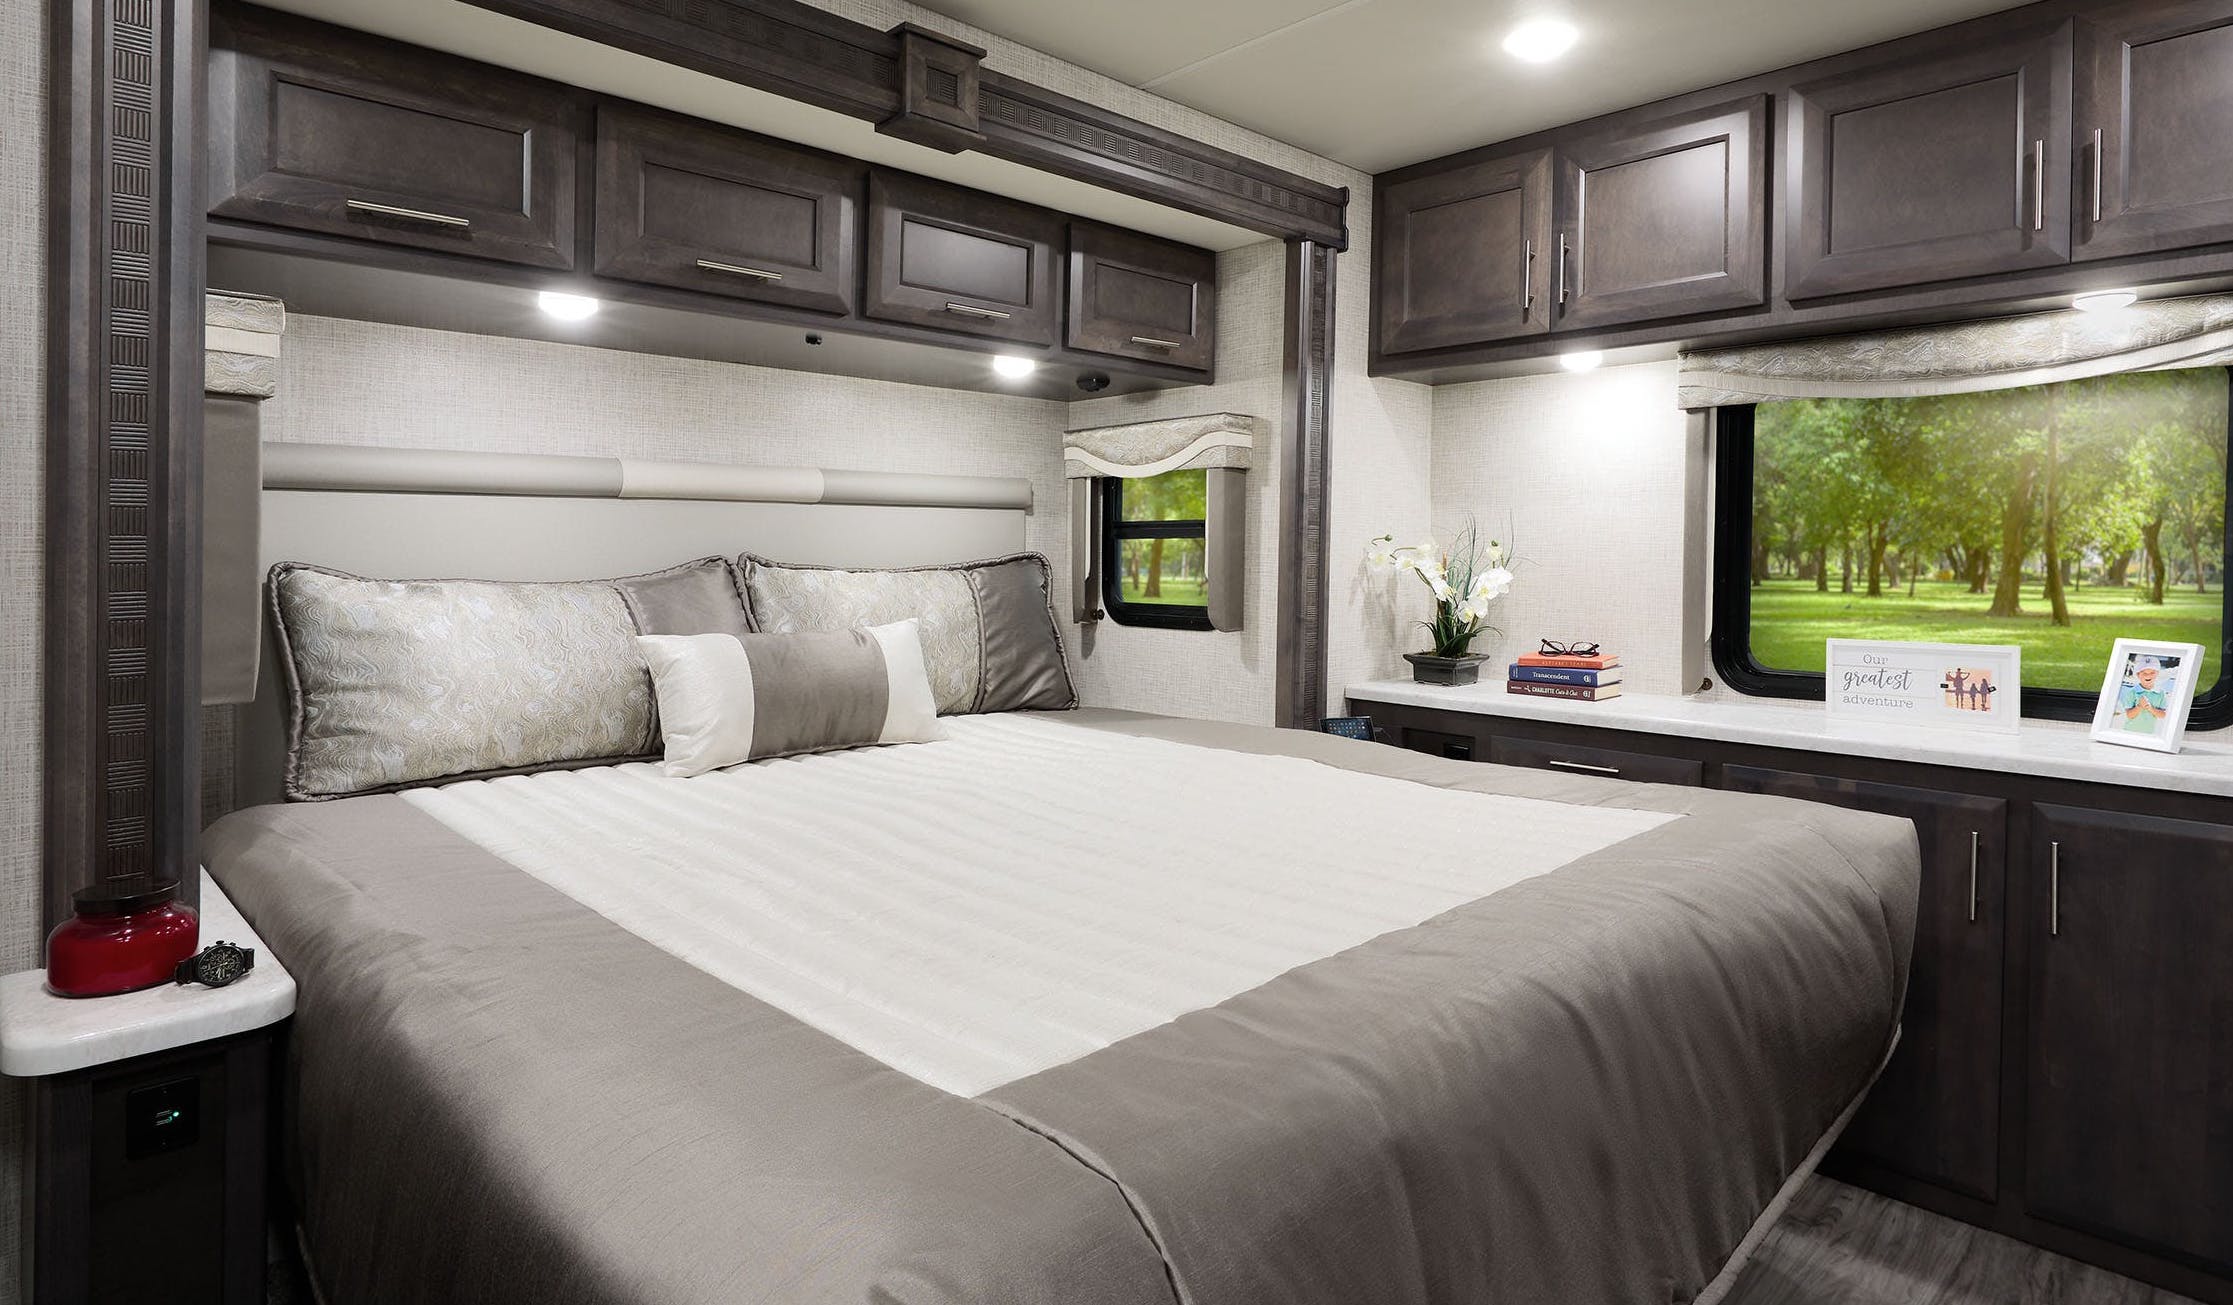 350k pasadena class c motorhome aims to pull in your cash like a moth to a flame 4